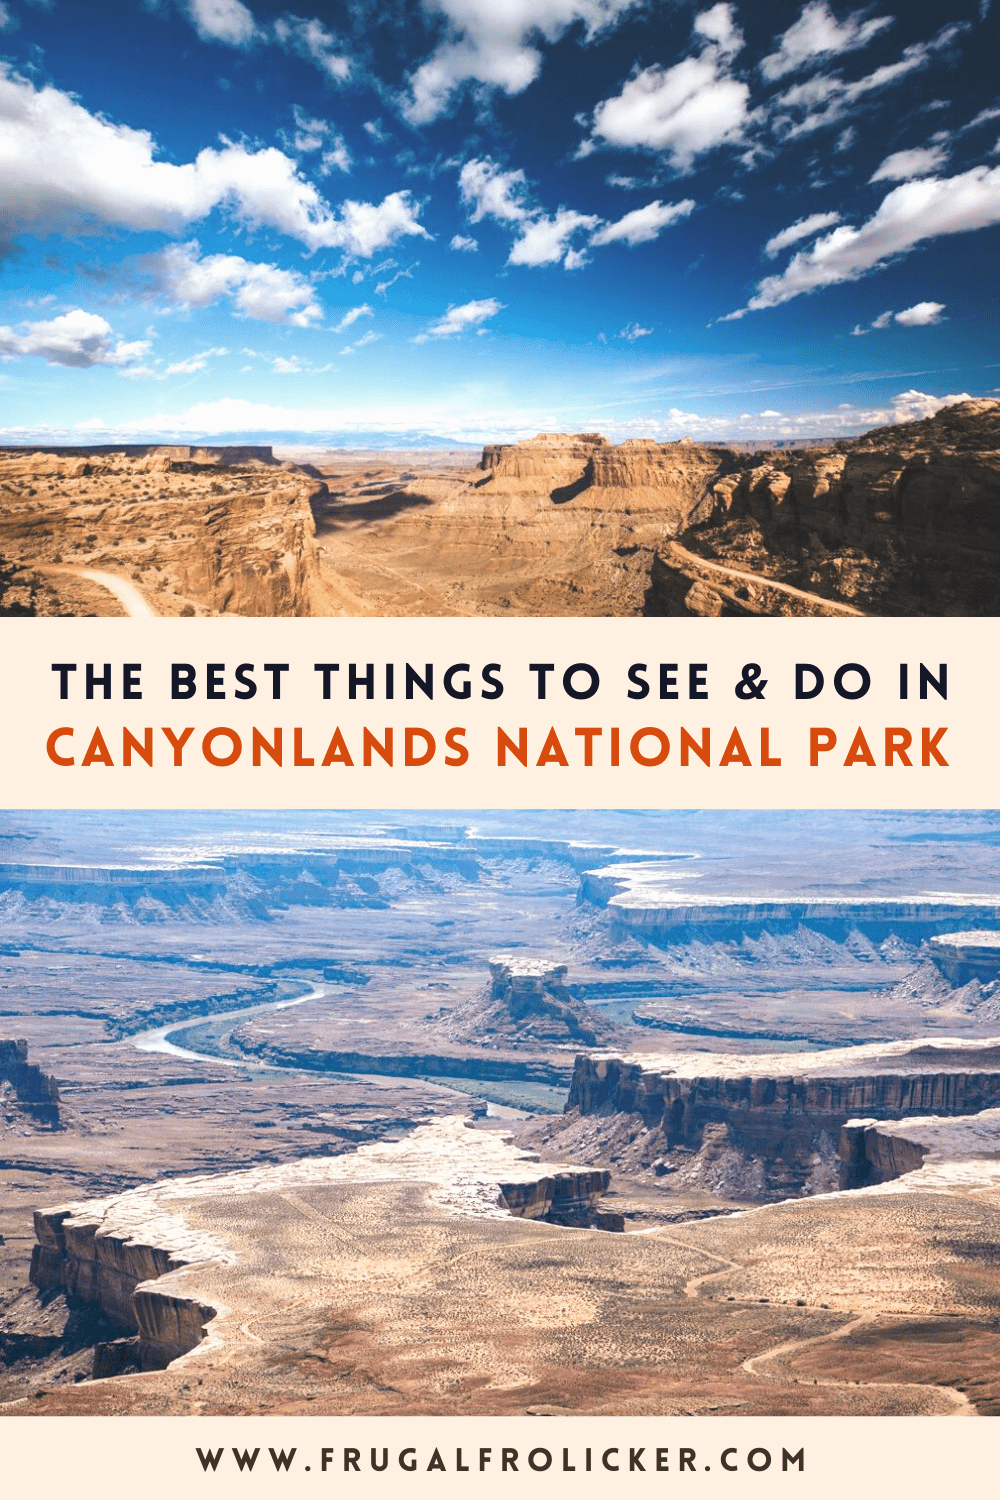 What to see and do at Canyonlands National Park